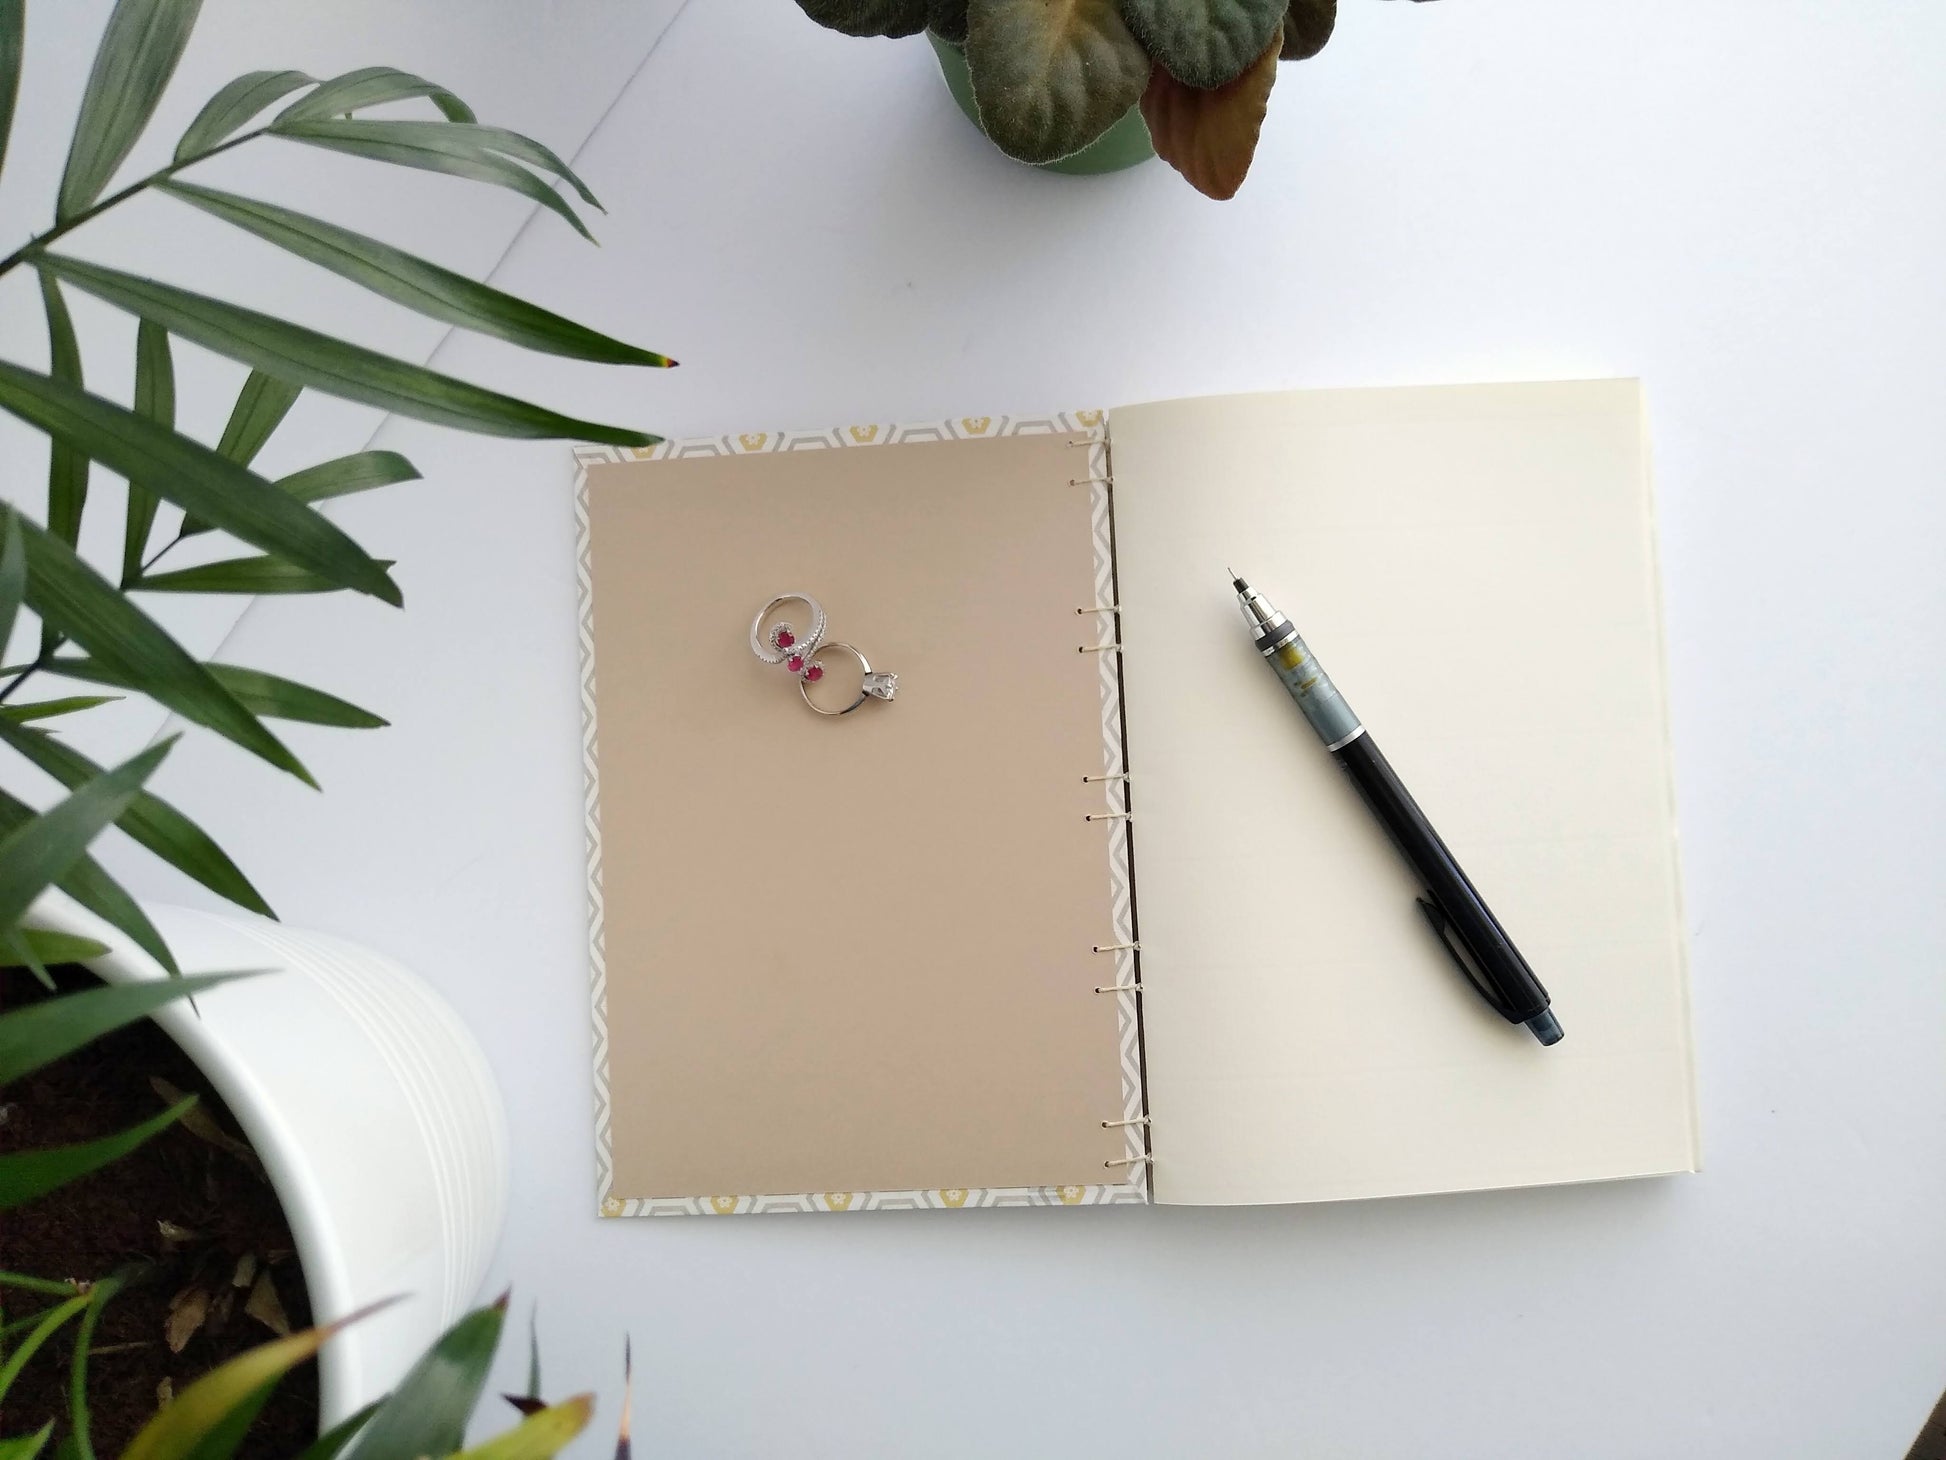 An open journal lays on a white background next to two potted plants. The journal has shows the inside cover with a taupe colored endpaper and the blank cream pages inside. There are two rings and a black mechanical pencil resting on top.